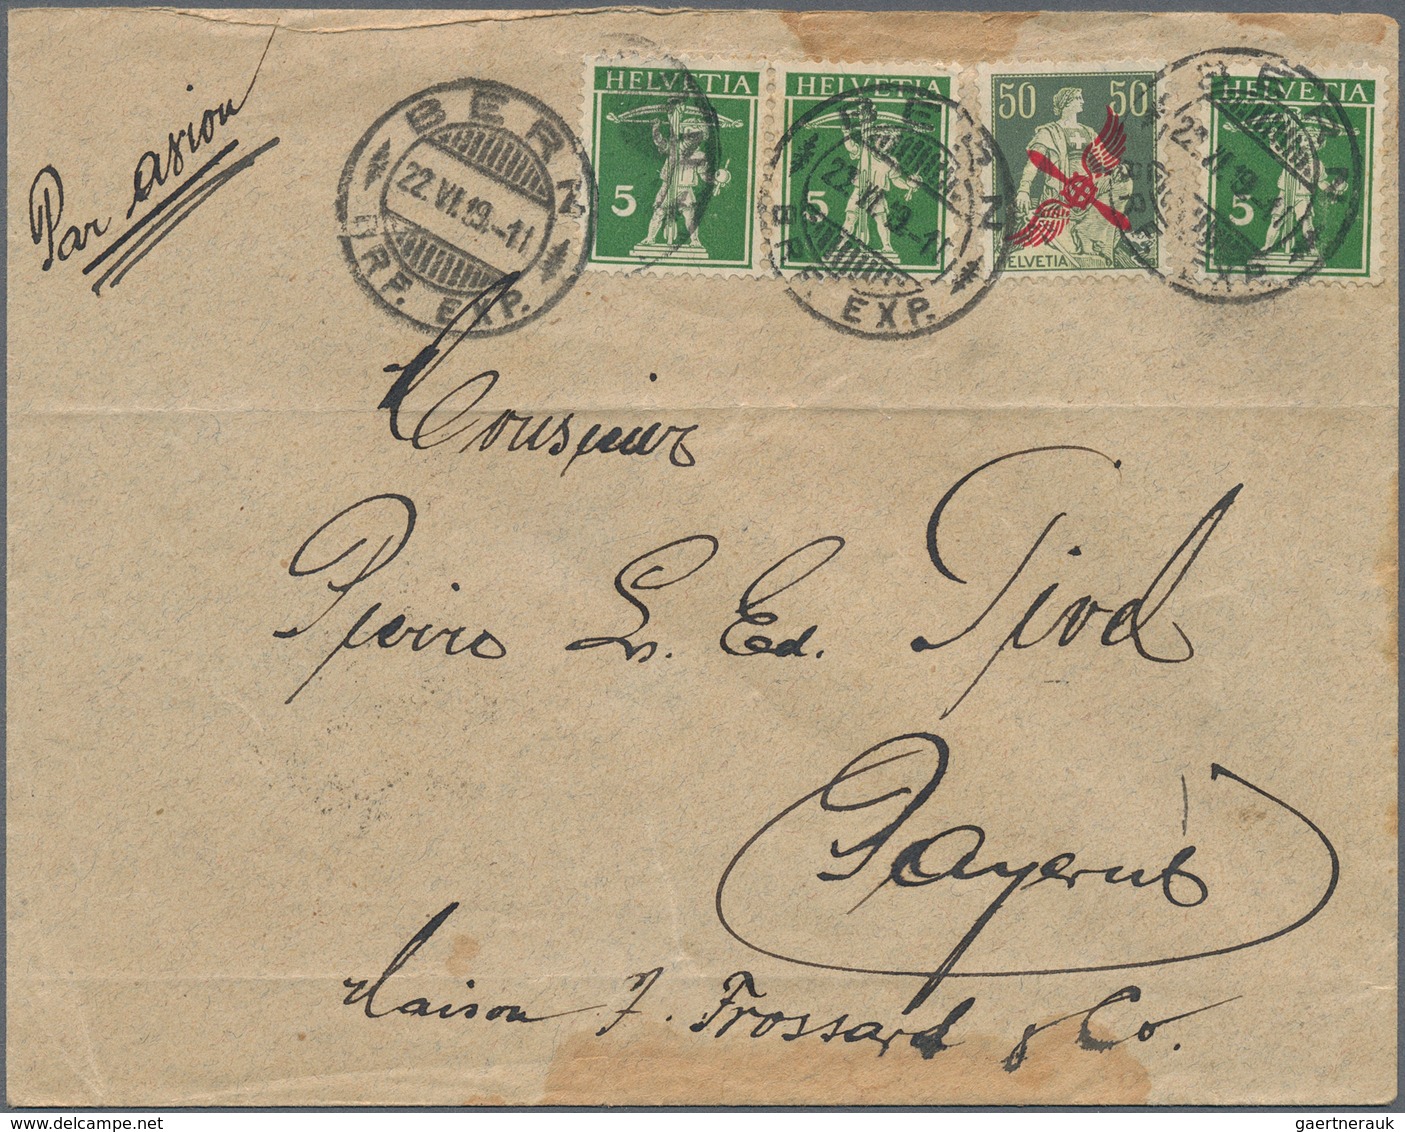 28629 Europa - West: 1890/1945, lot of ca. 200 covers, cards and postal stationeries with many interesting